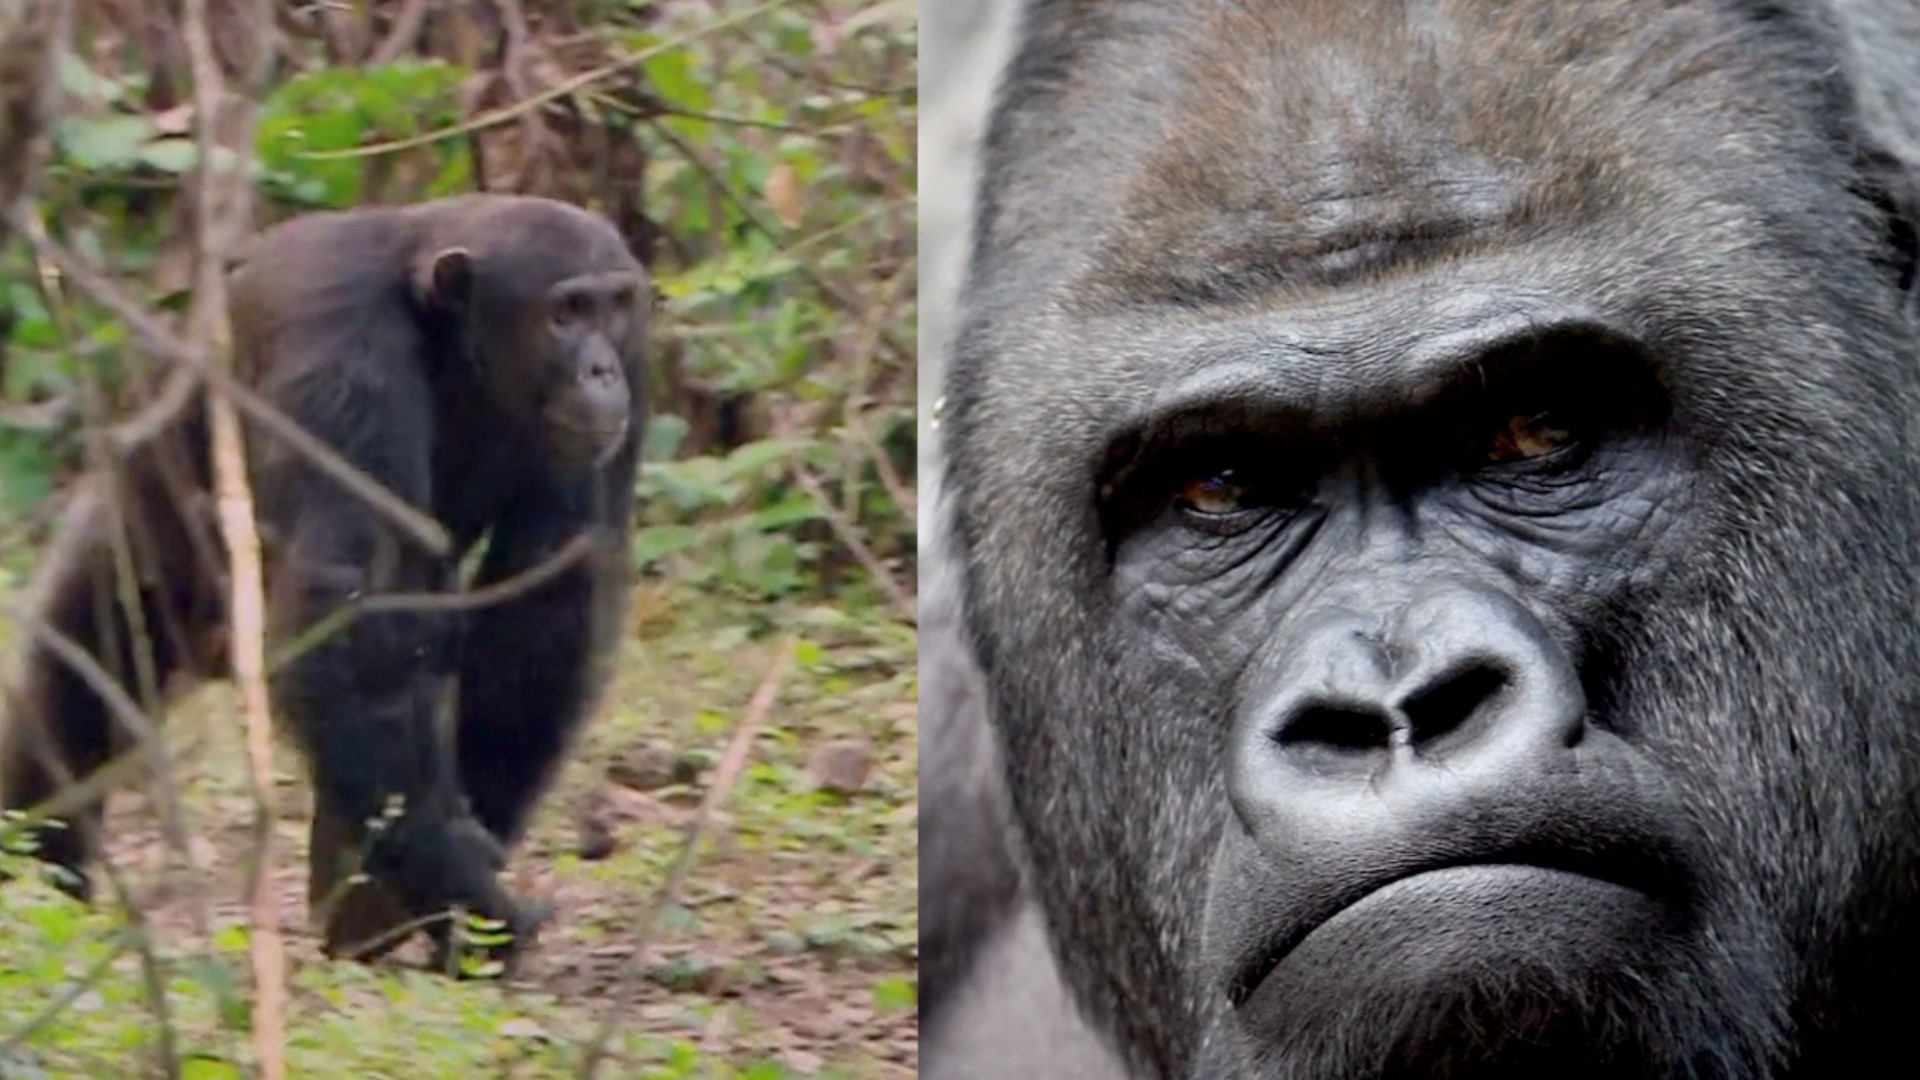 Interspecies Primate War Has Been Observed in the Wild For the First Time | newscentermaine.com